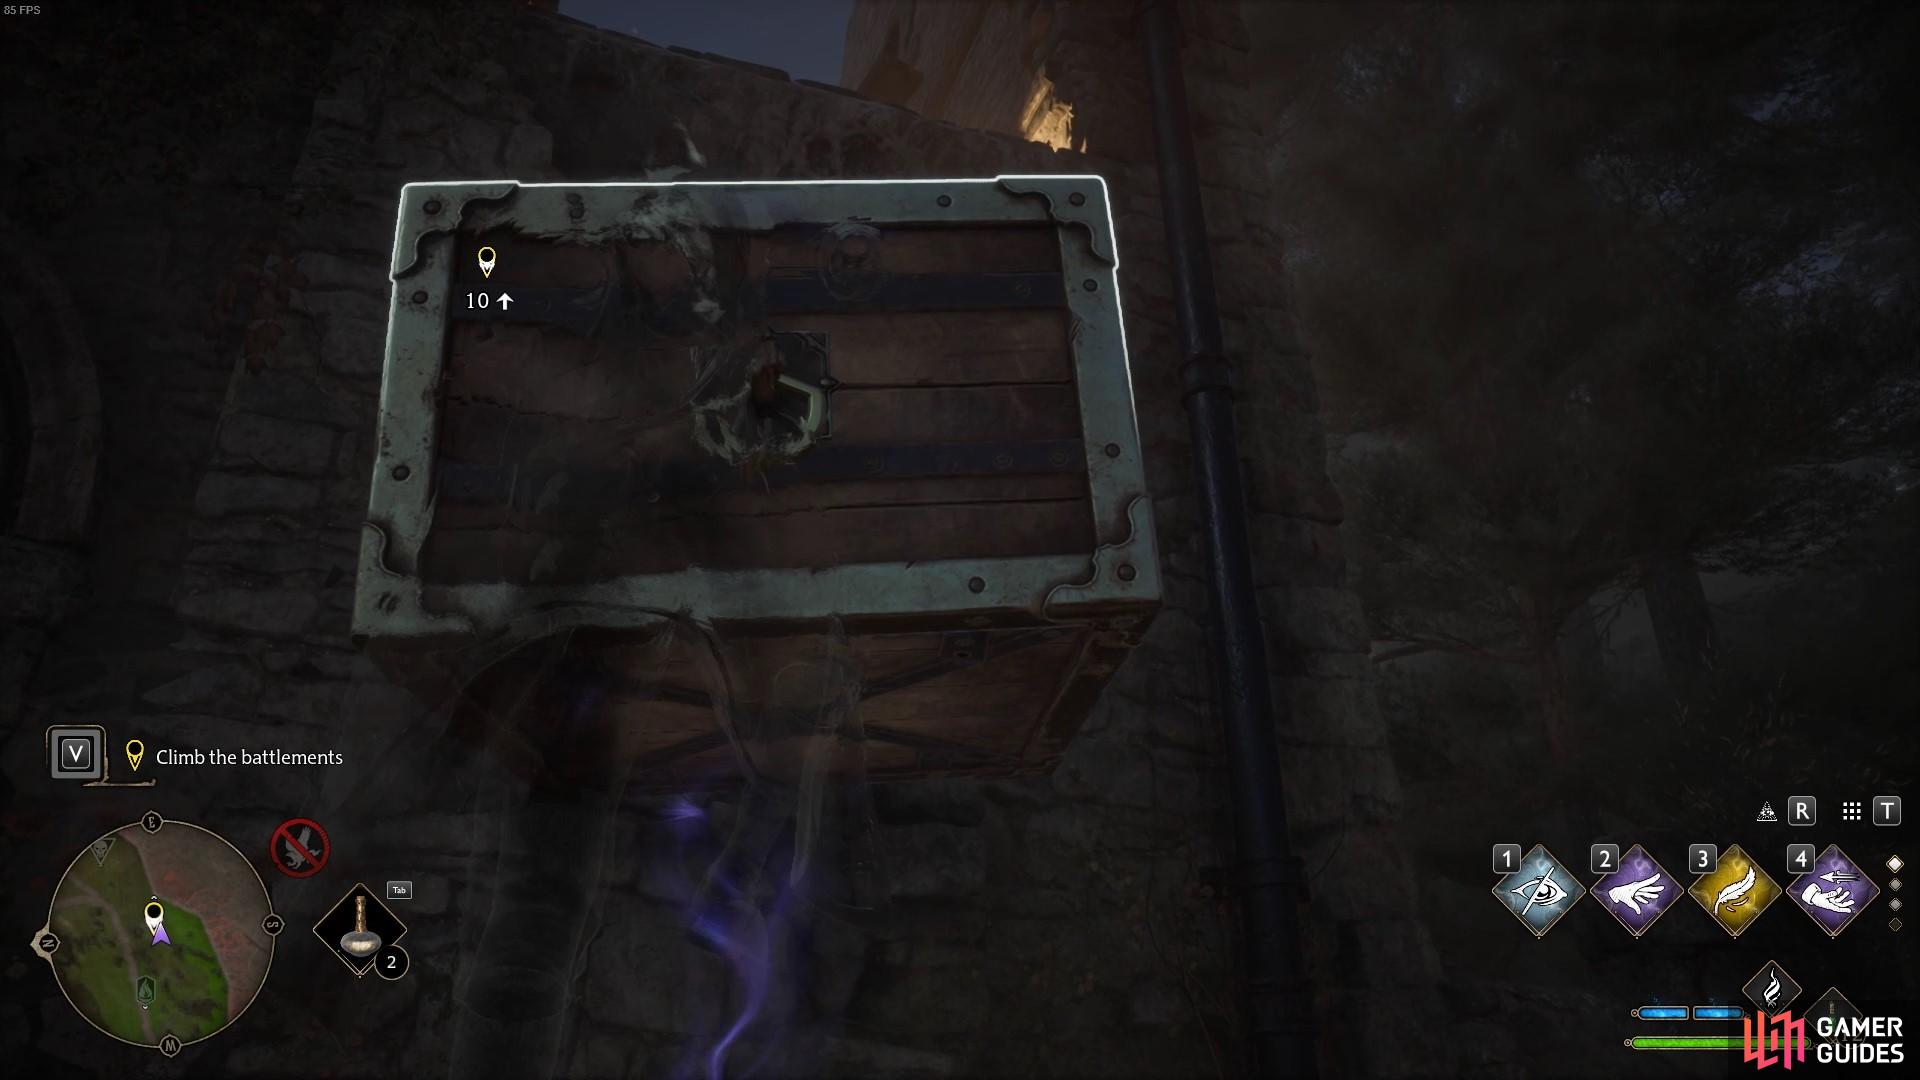 Use the box as a platform to complete the Climb the Battlement section of the High Keep quest.